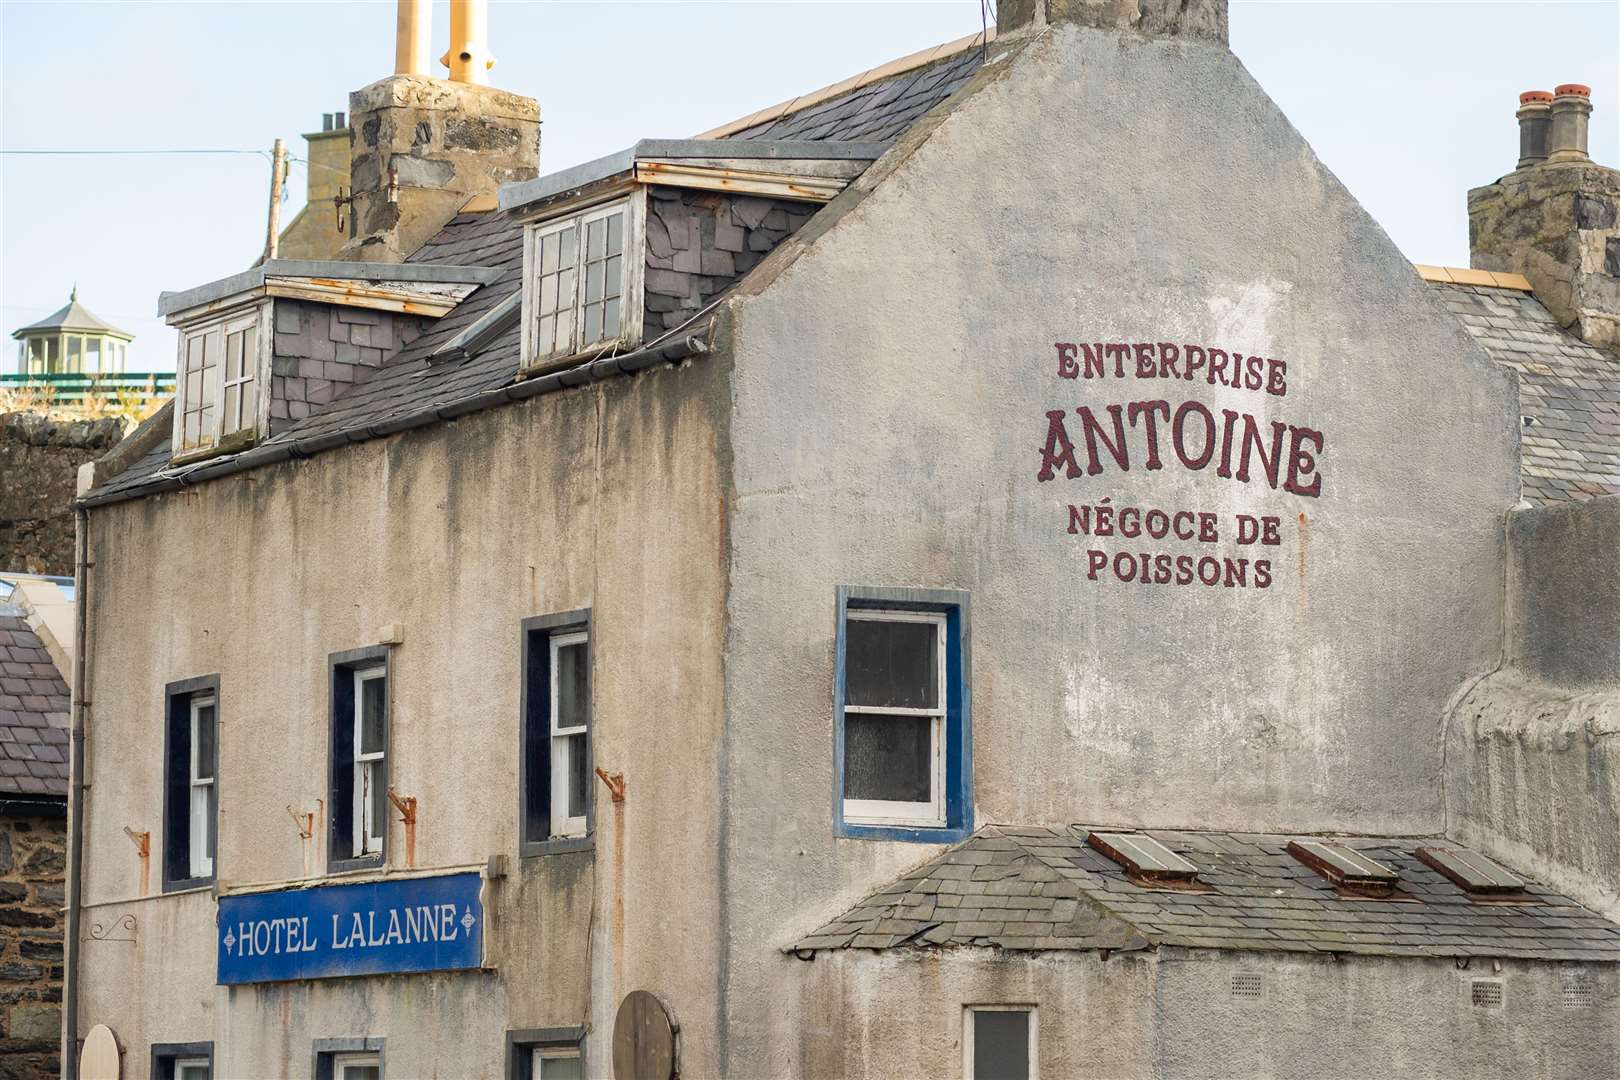 The Shore Inn has been renamed 'Hotel Lalanne' and painted in a murky white colour. It also has a French logo added to the side of the building which says 'Enterprise Antoine Negoce de Poissons'...The area around the harbour in Portsoy undergoes a transformation ahead of the filming of Peaky Blinders... Picture: Daniel Forsyth..